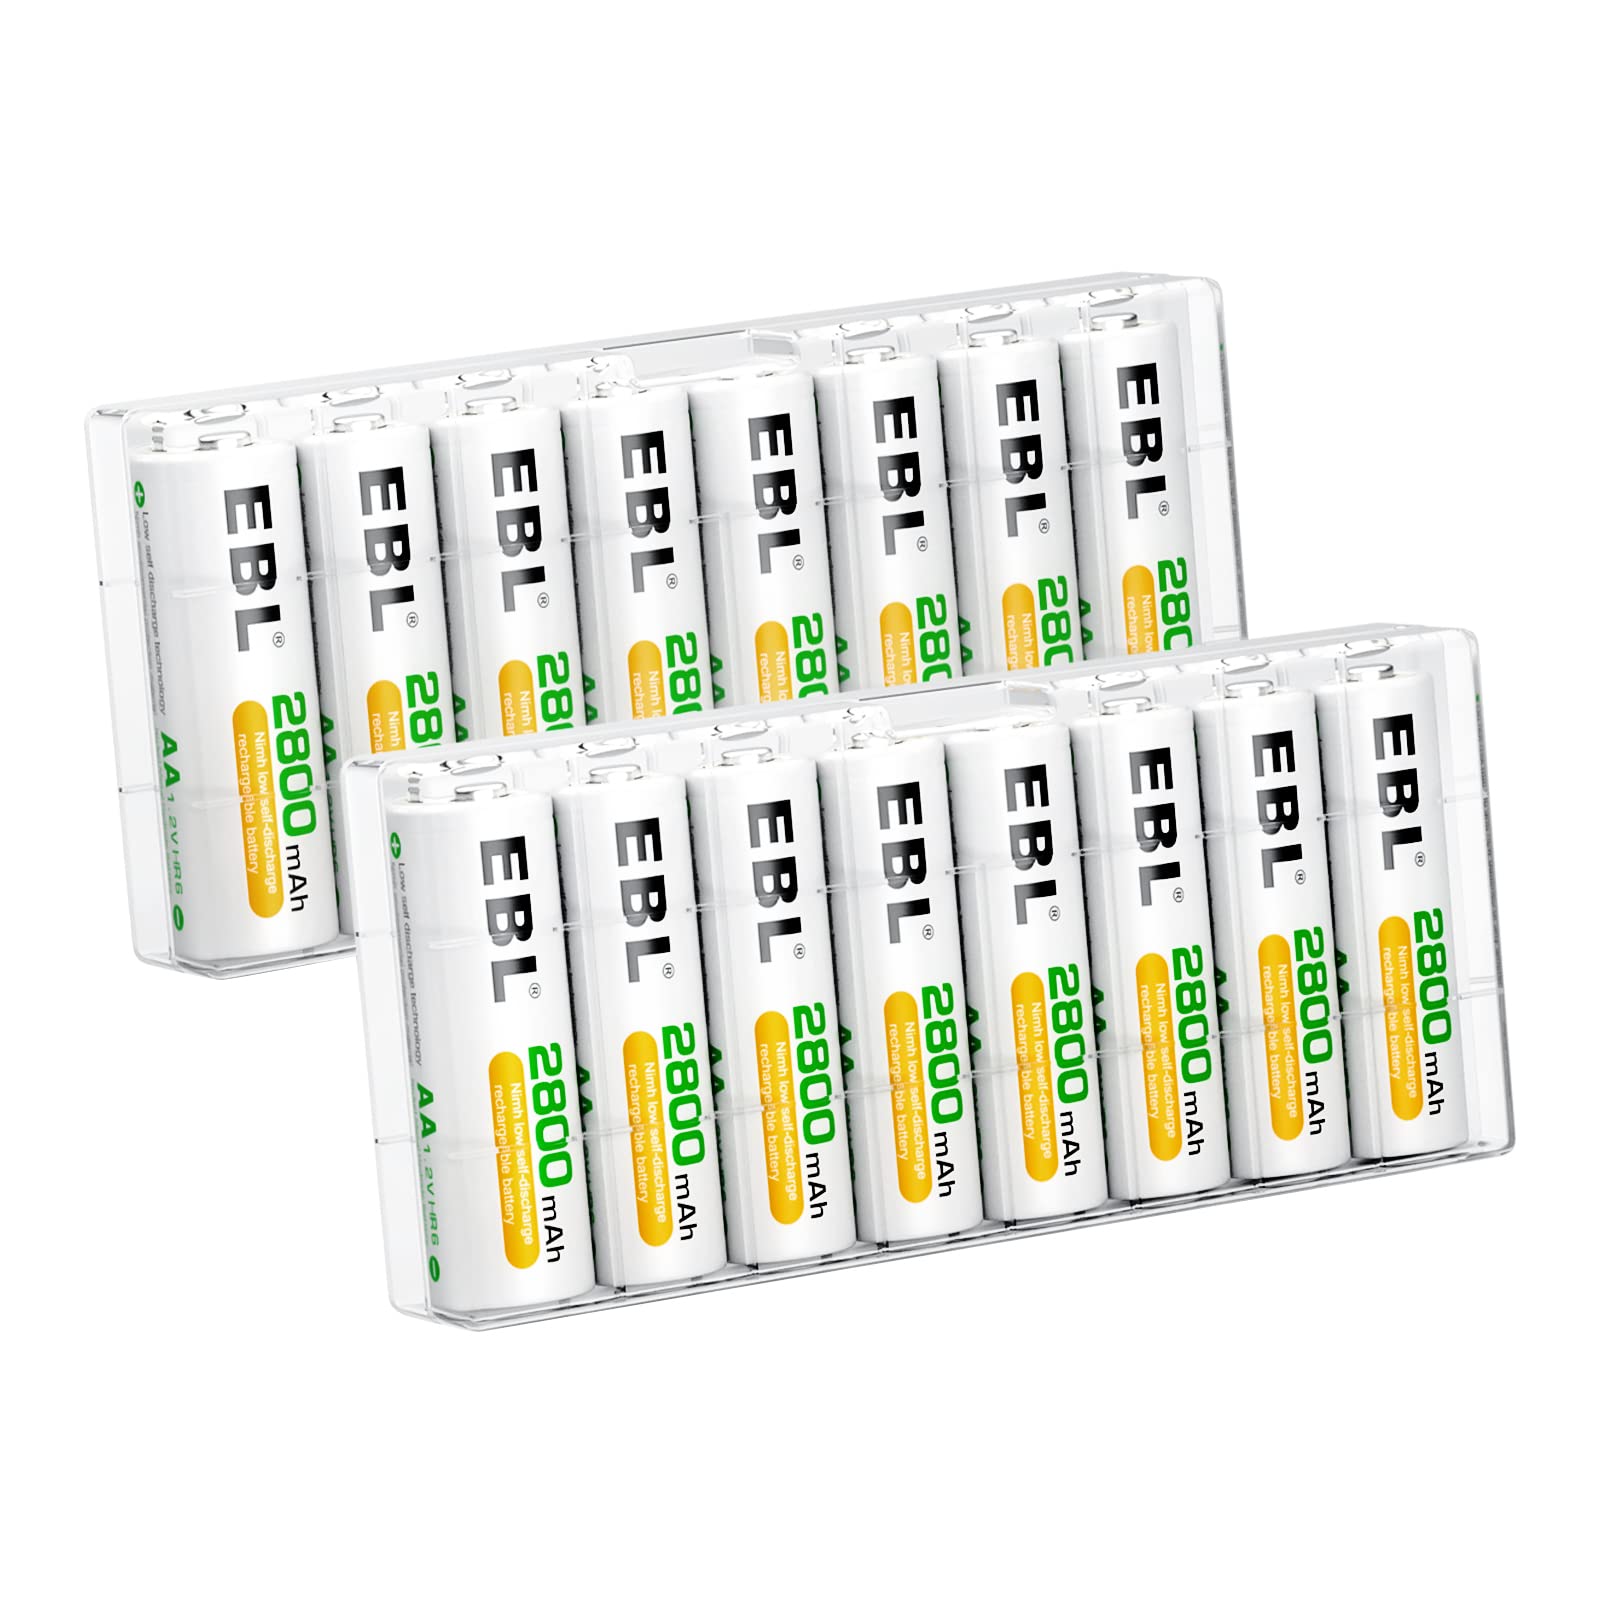 EBL Rechargeable Batteries with Charger, 1.2V NiMH AA Batteries 2800mAh  4Counts & AAA Batteries 1100mAh 4Counts with 8-Bay Smart Battery Charger